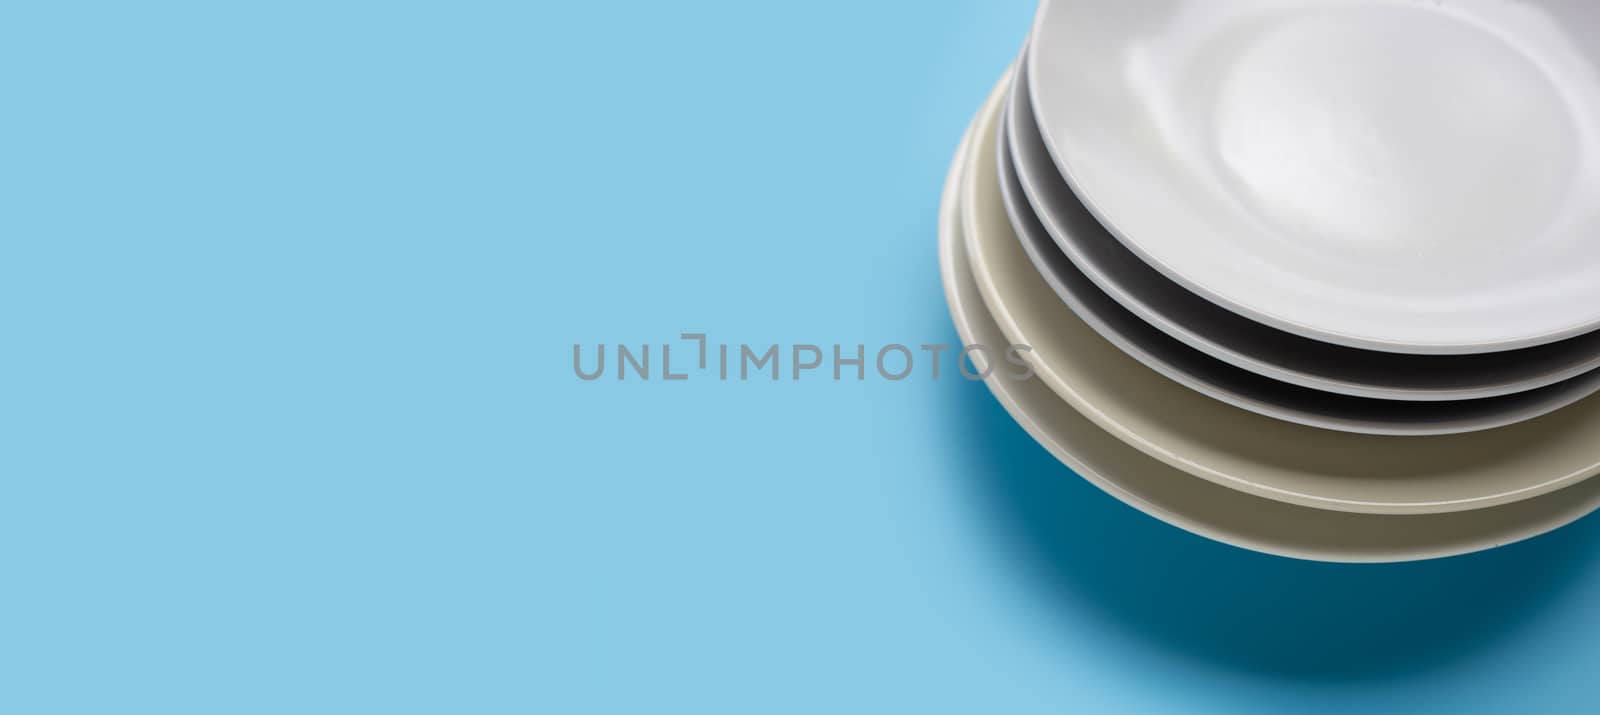 Stack of dishes on blue background. Copy space